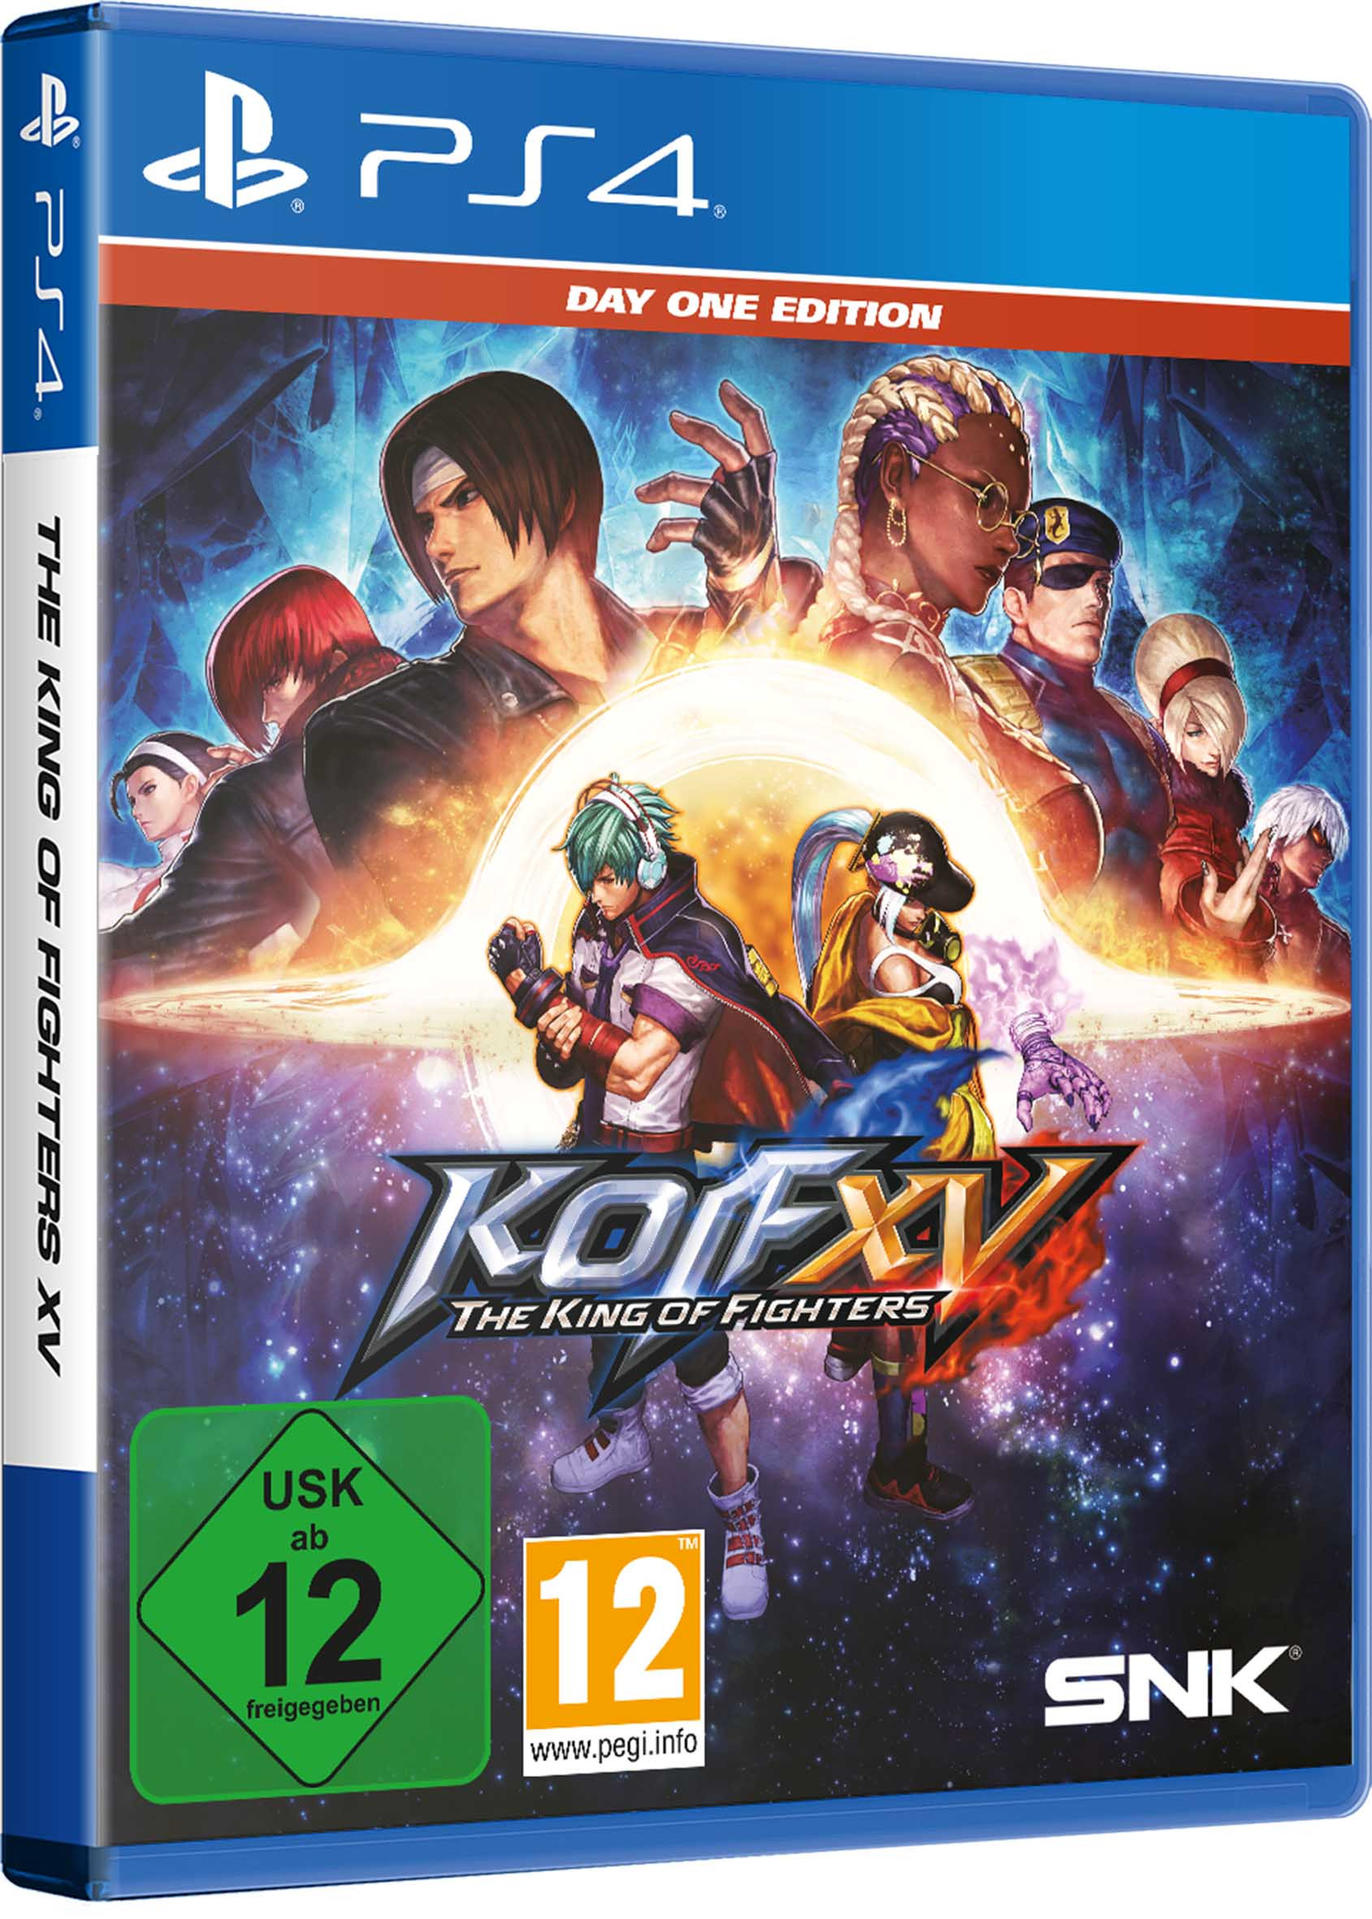 PS4 THE KING OF FIGHTERS 4] EDITION XV DAY ONE - [PlayStation